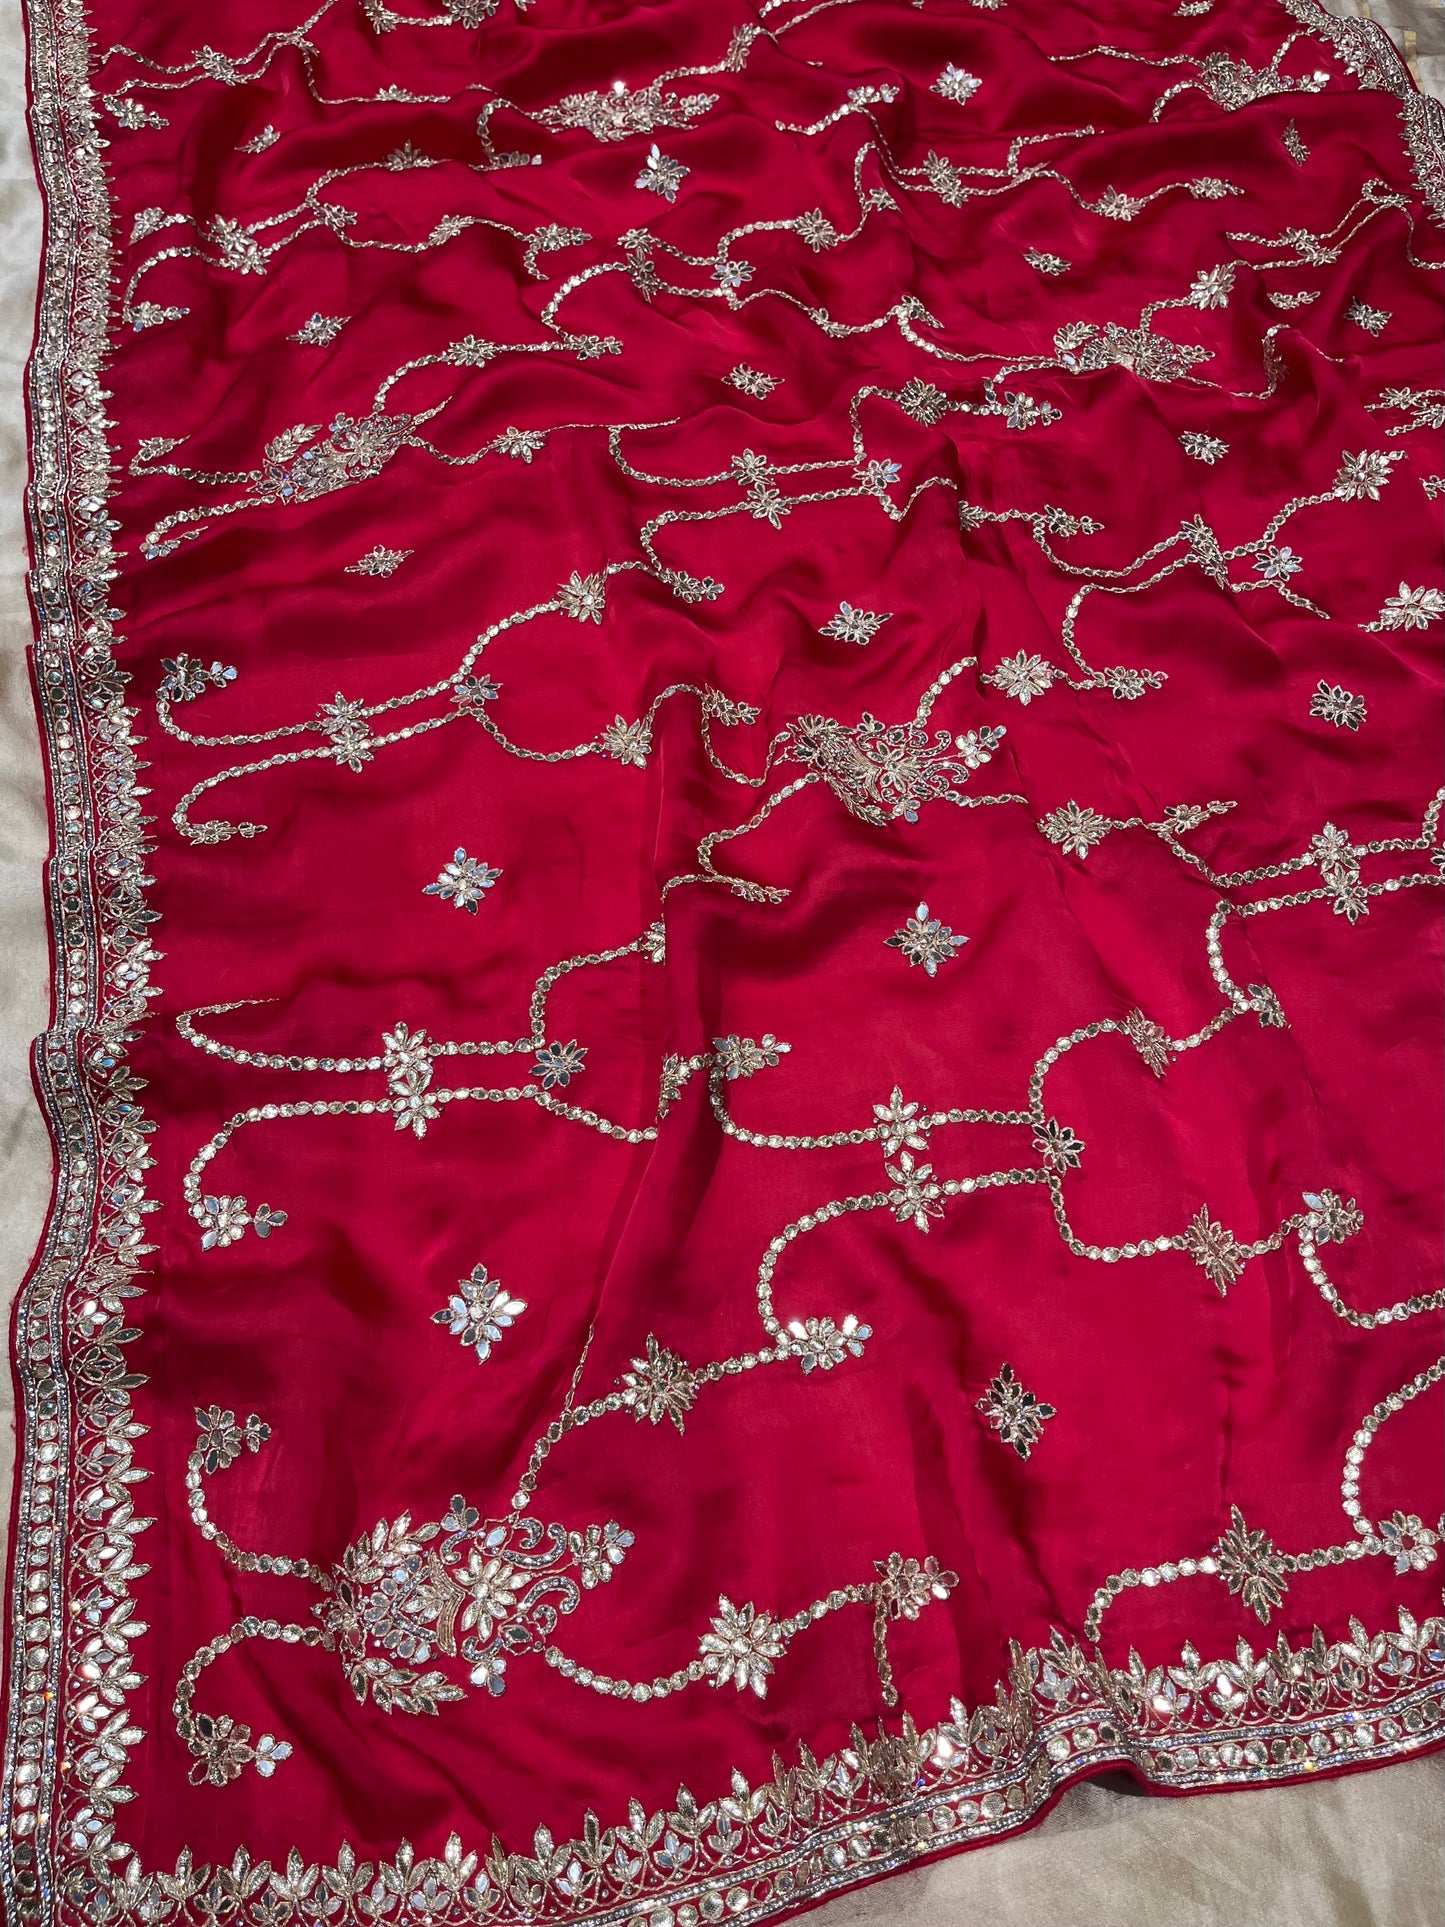 HOT PINK COLOUR PURE SATIN SILK ORGANZA EMBROIDERED SAREE EMBELLISHED WITH GOTA PATTI & MIRROR FOIL WORK